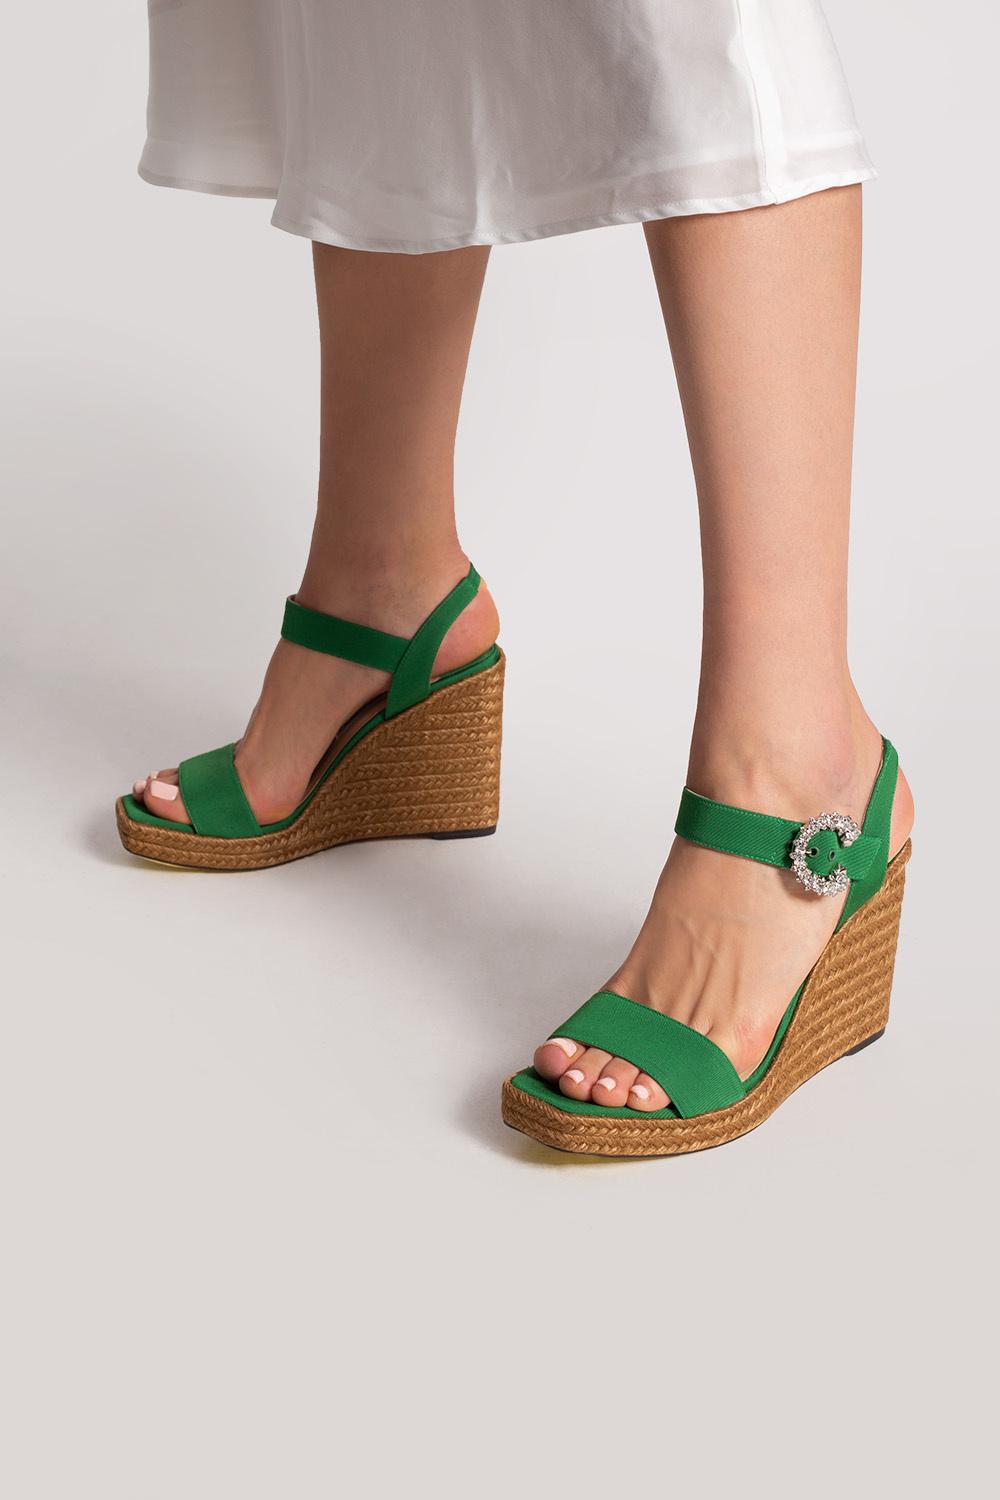 Jimmy Choo Leather 'mirabelle' Wedge Sandals in Green | Lyst